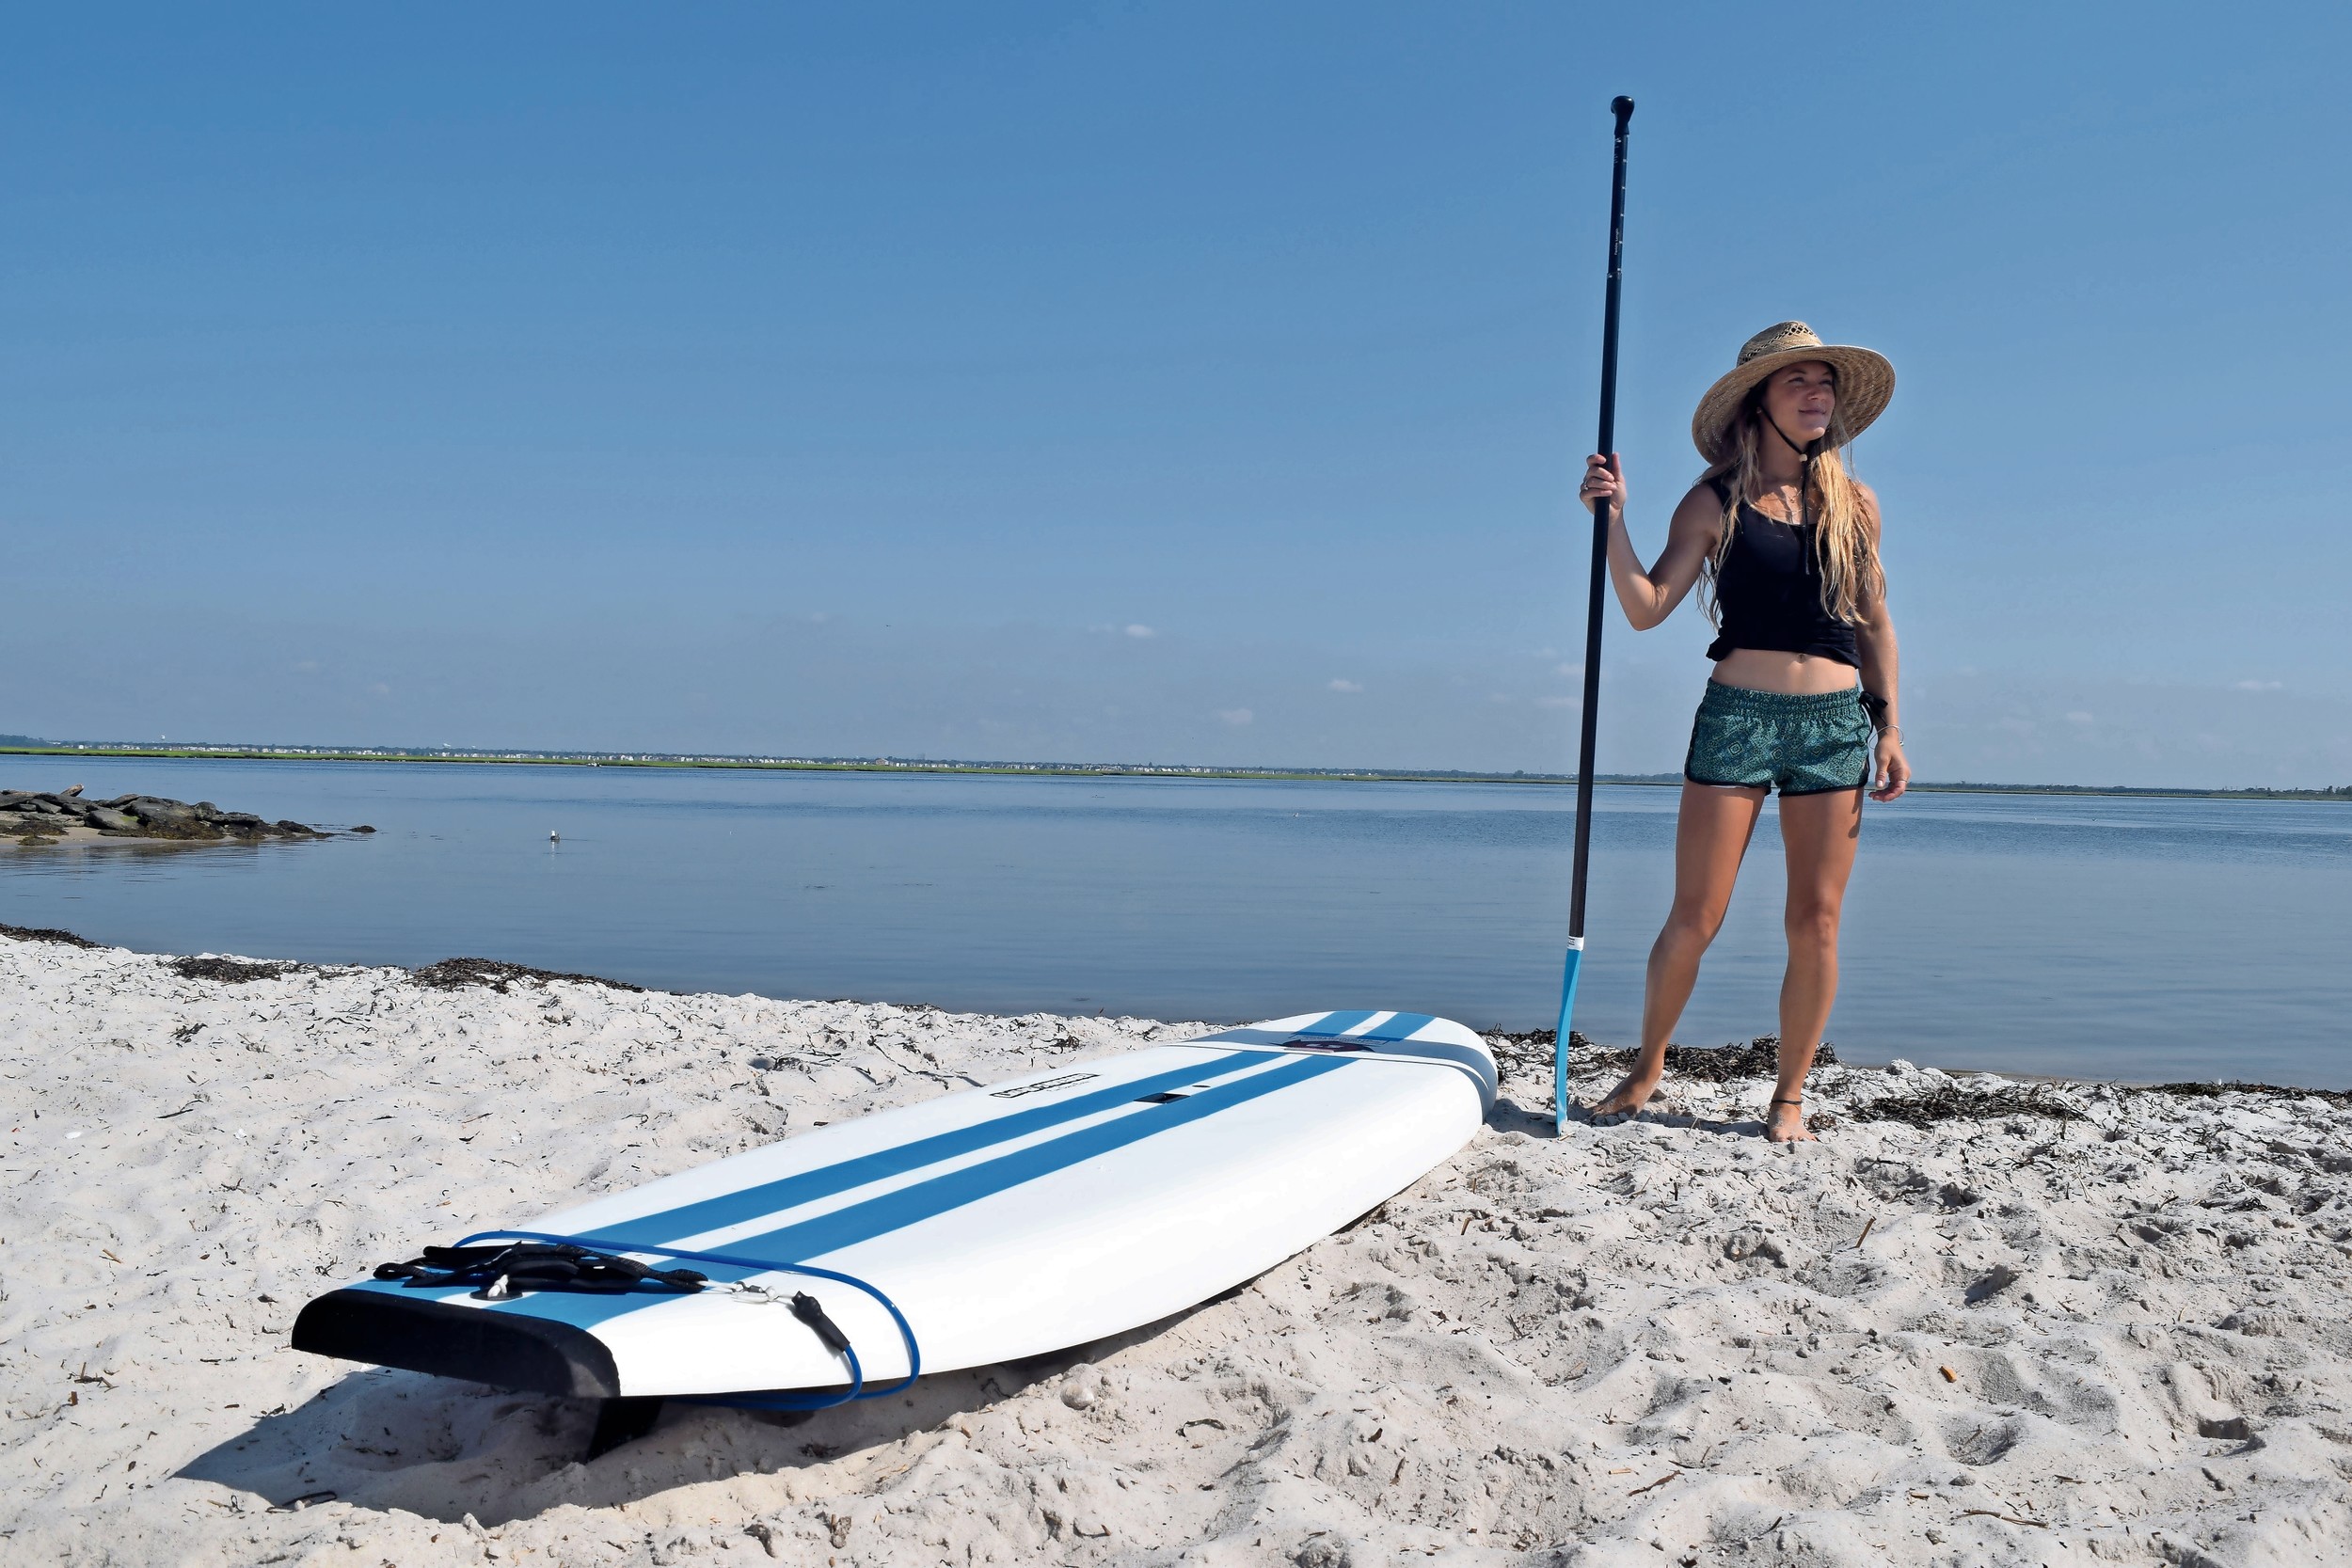 Hanono, 30, has been a certified paddleboard instructor for five years.